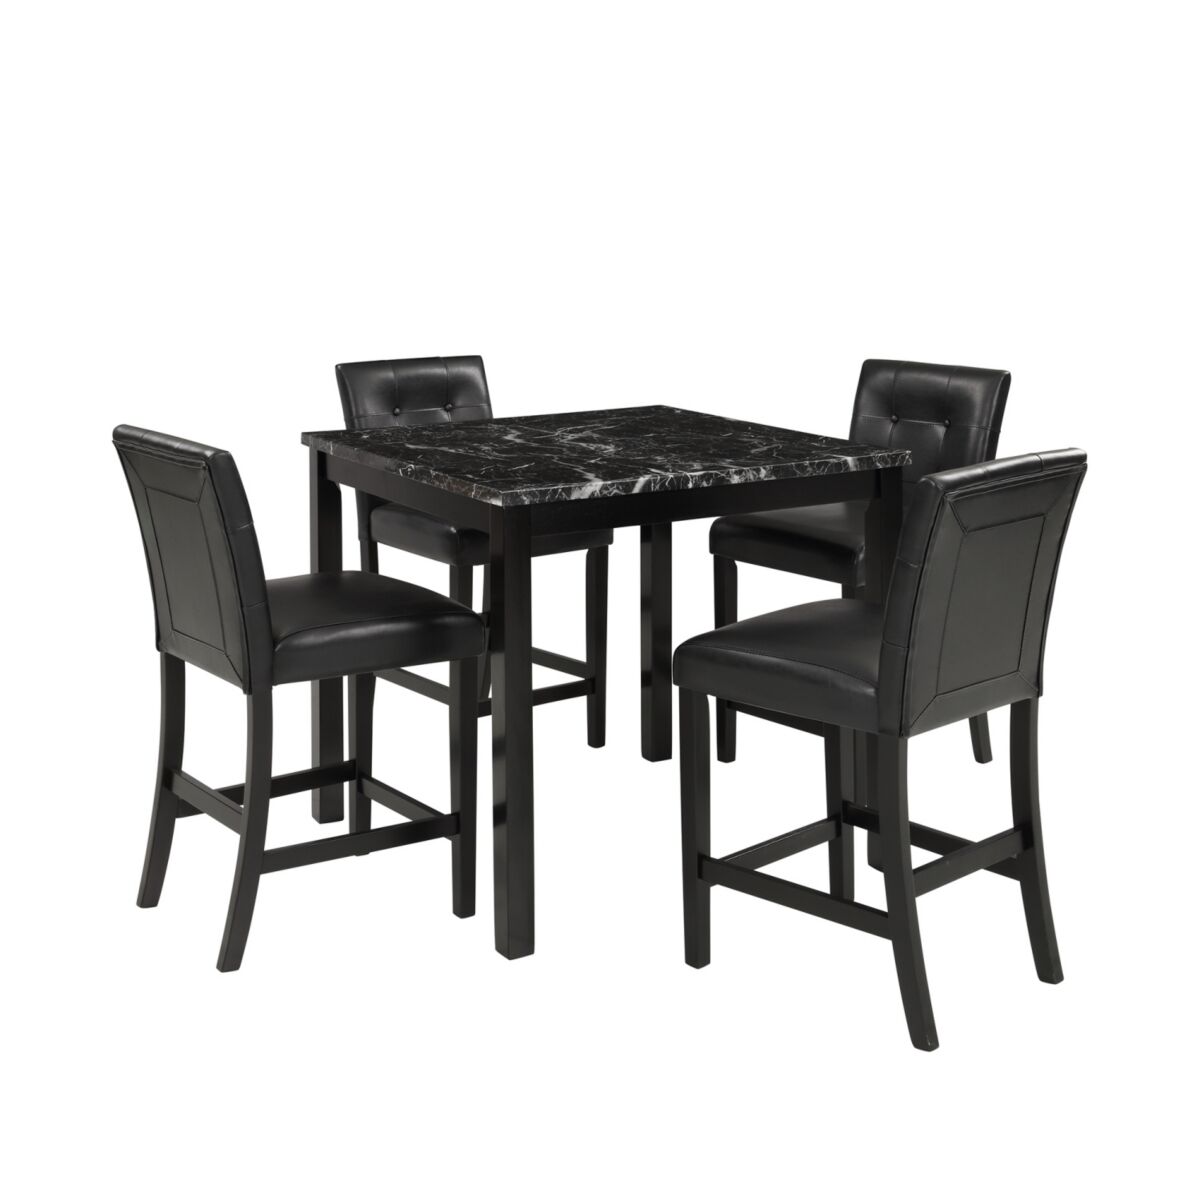 Simplie Fun 5-Piece Kitchen Table Set Faux Marble Top Counter Height Dining Table Set with 4 Pu Leather-Upholstered Chairs (Black) - Black